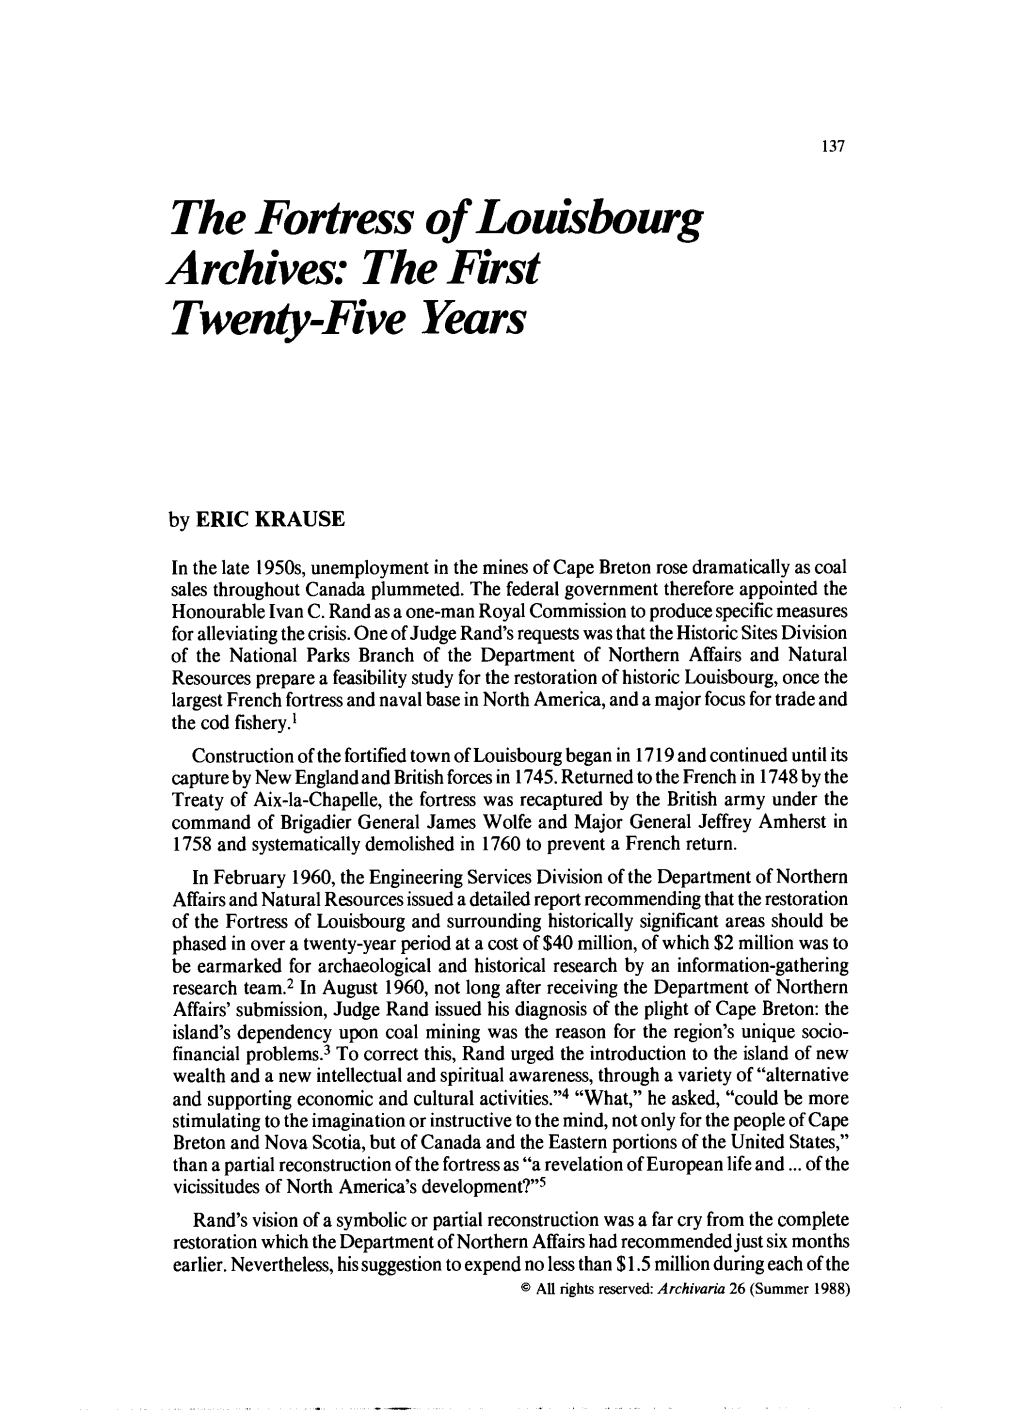 The Fortress of Louisbourg Archives: the First Twenty-Five Years